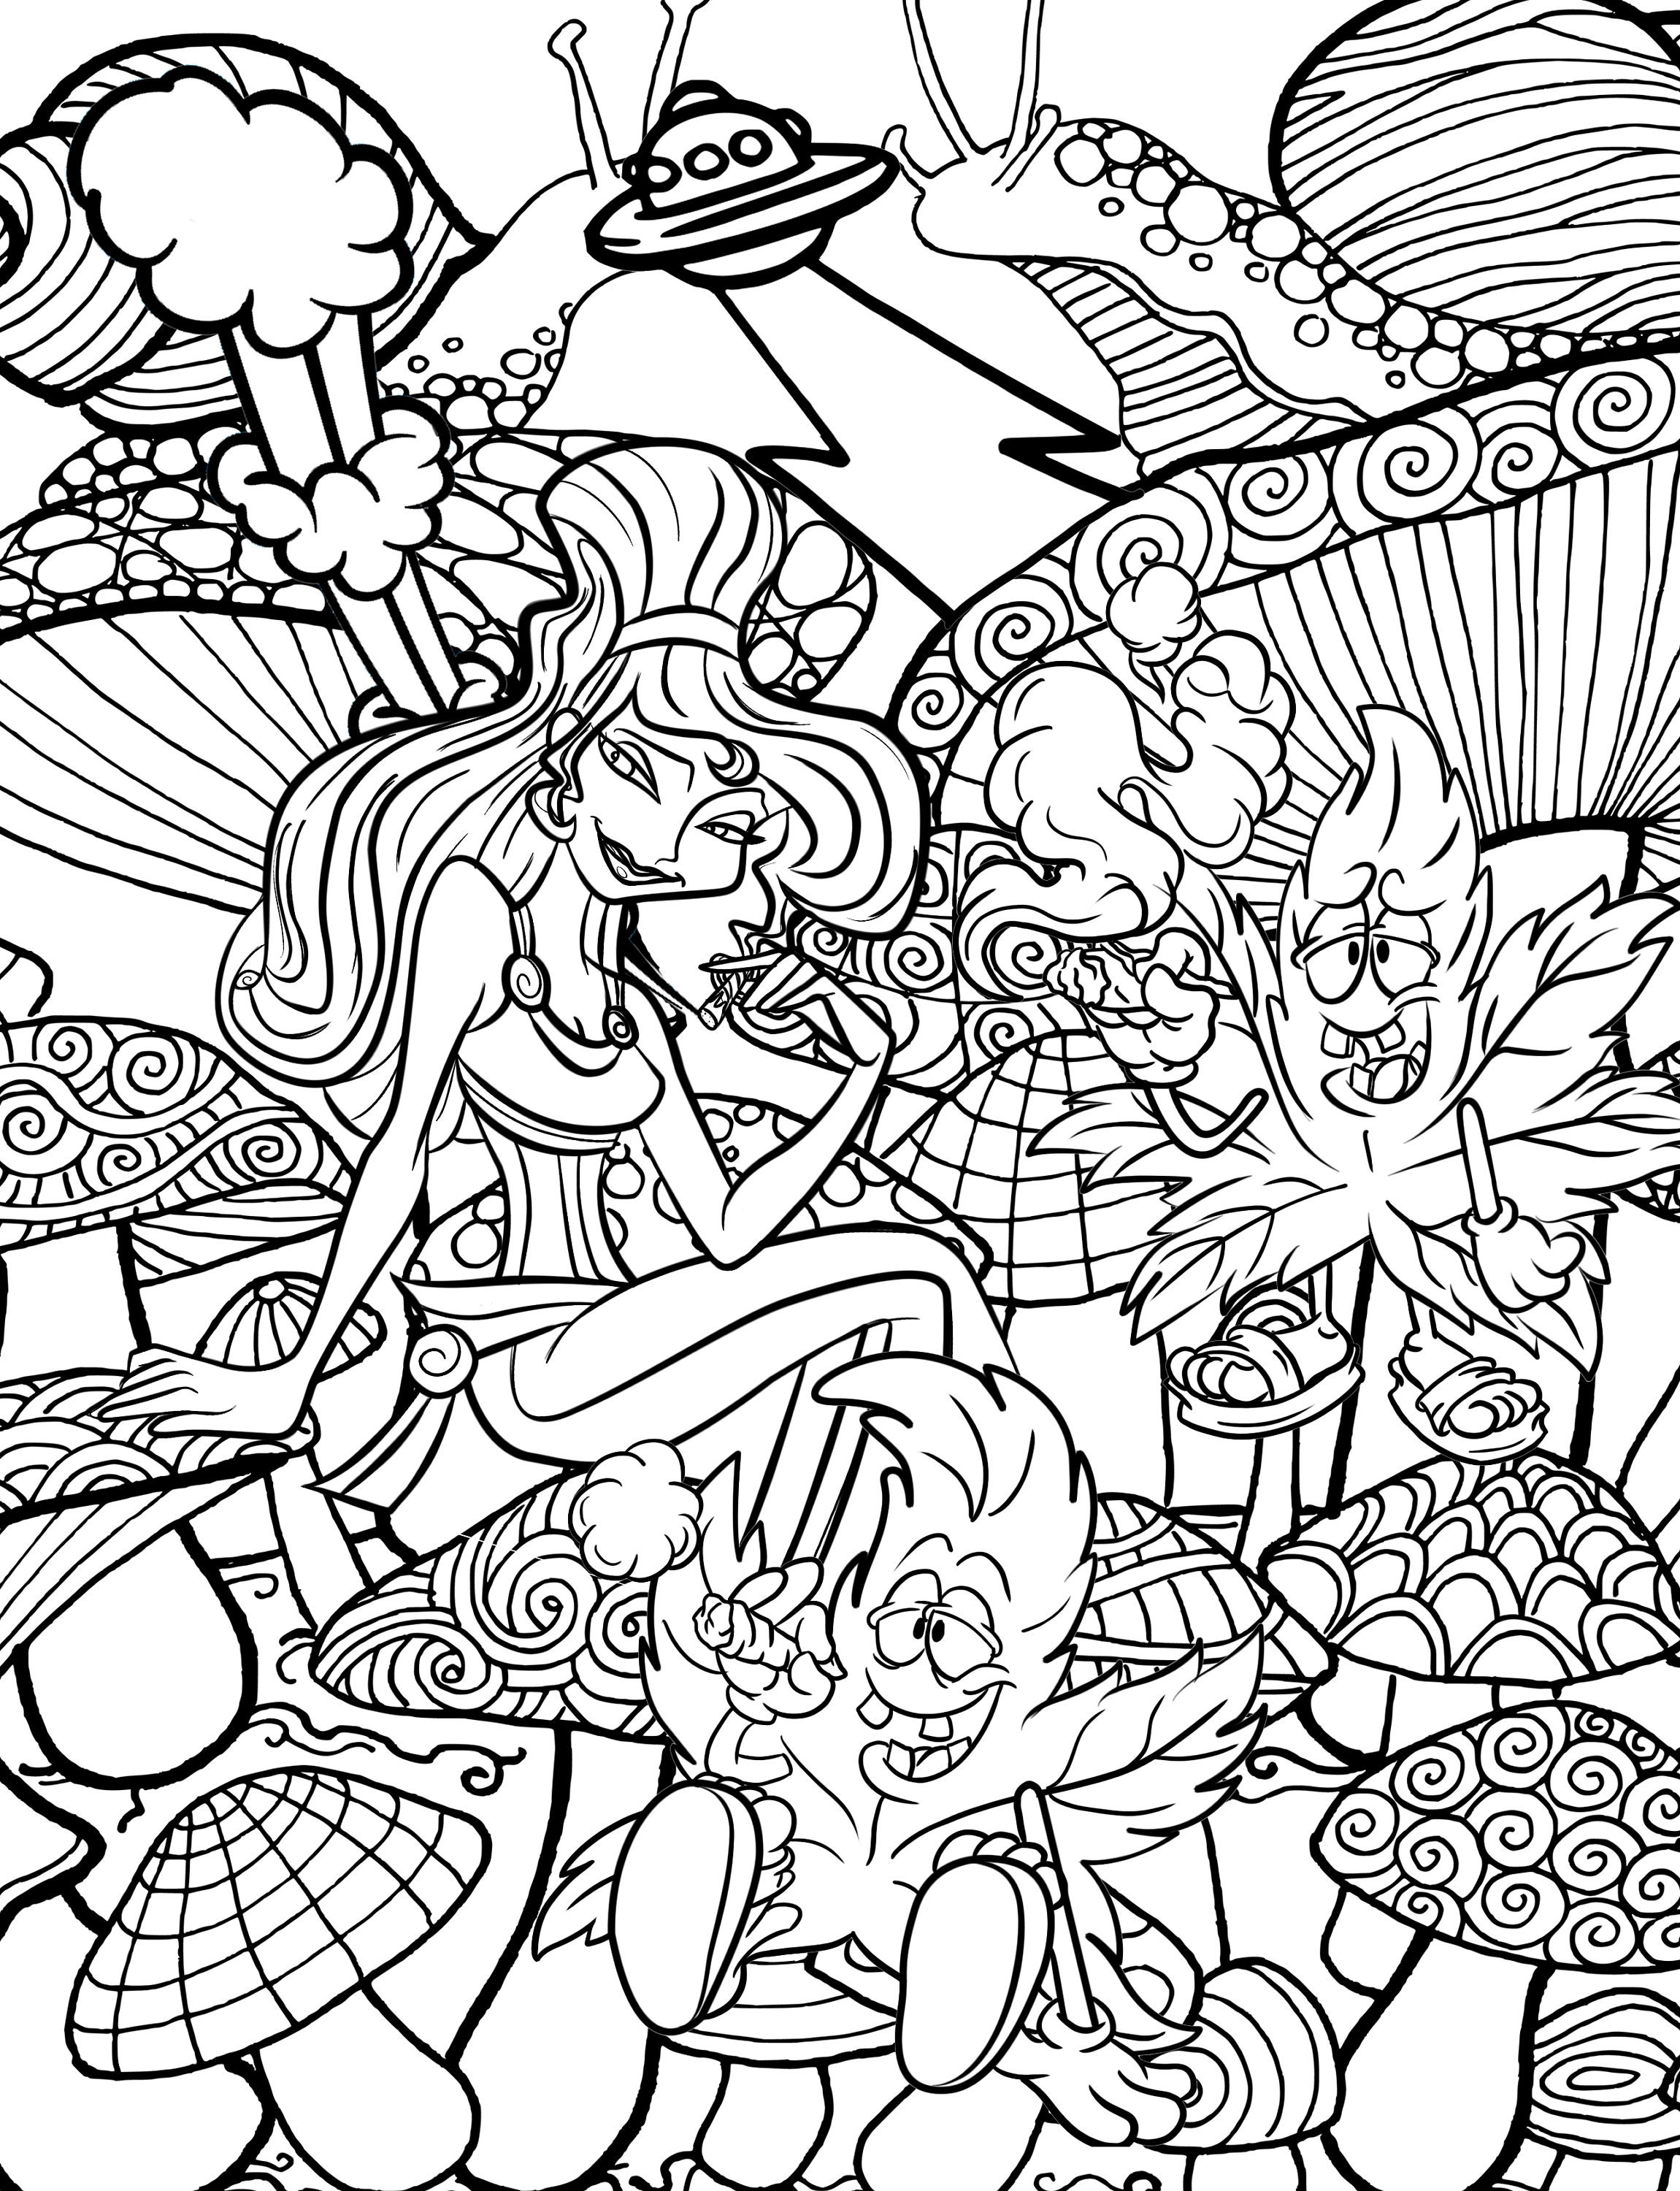 Princess Stoner Coloring Book: Great Coloring Book For Adults | Etsy